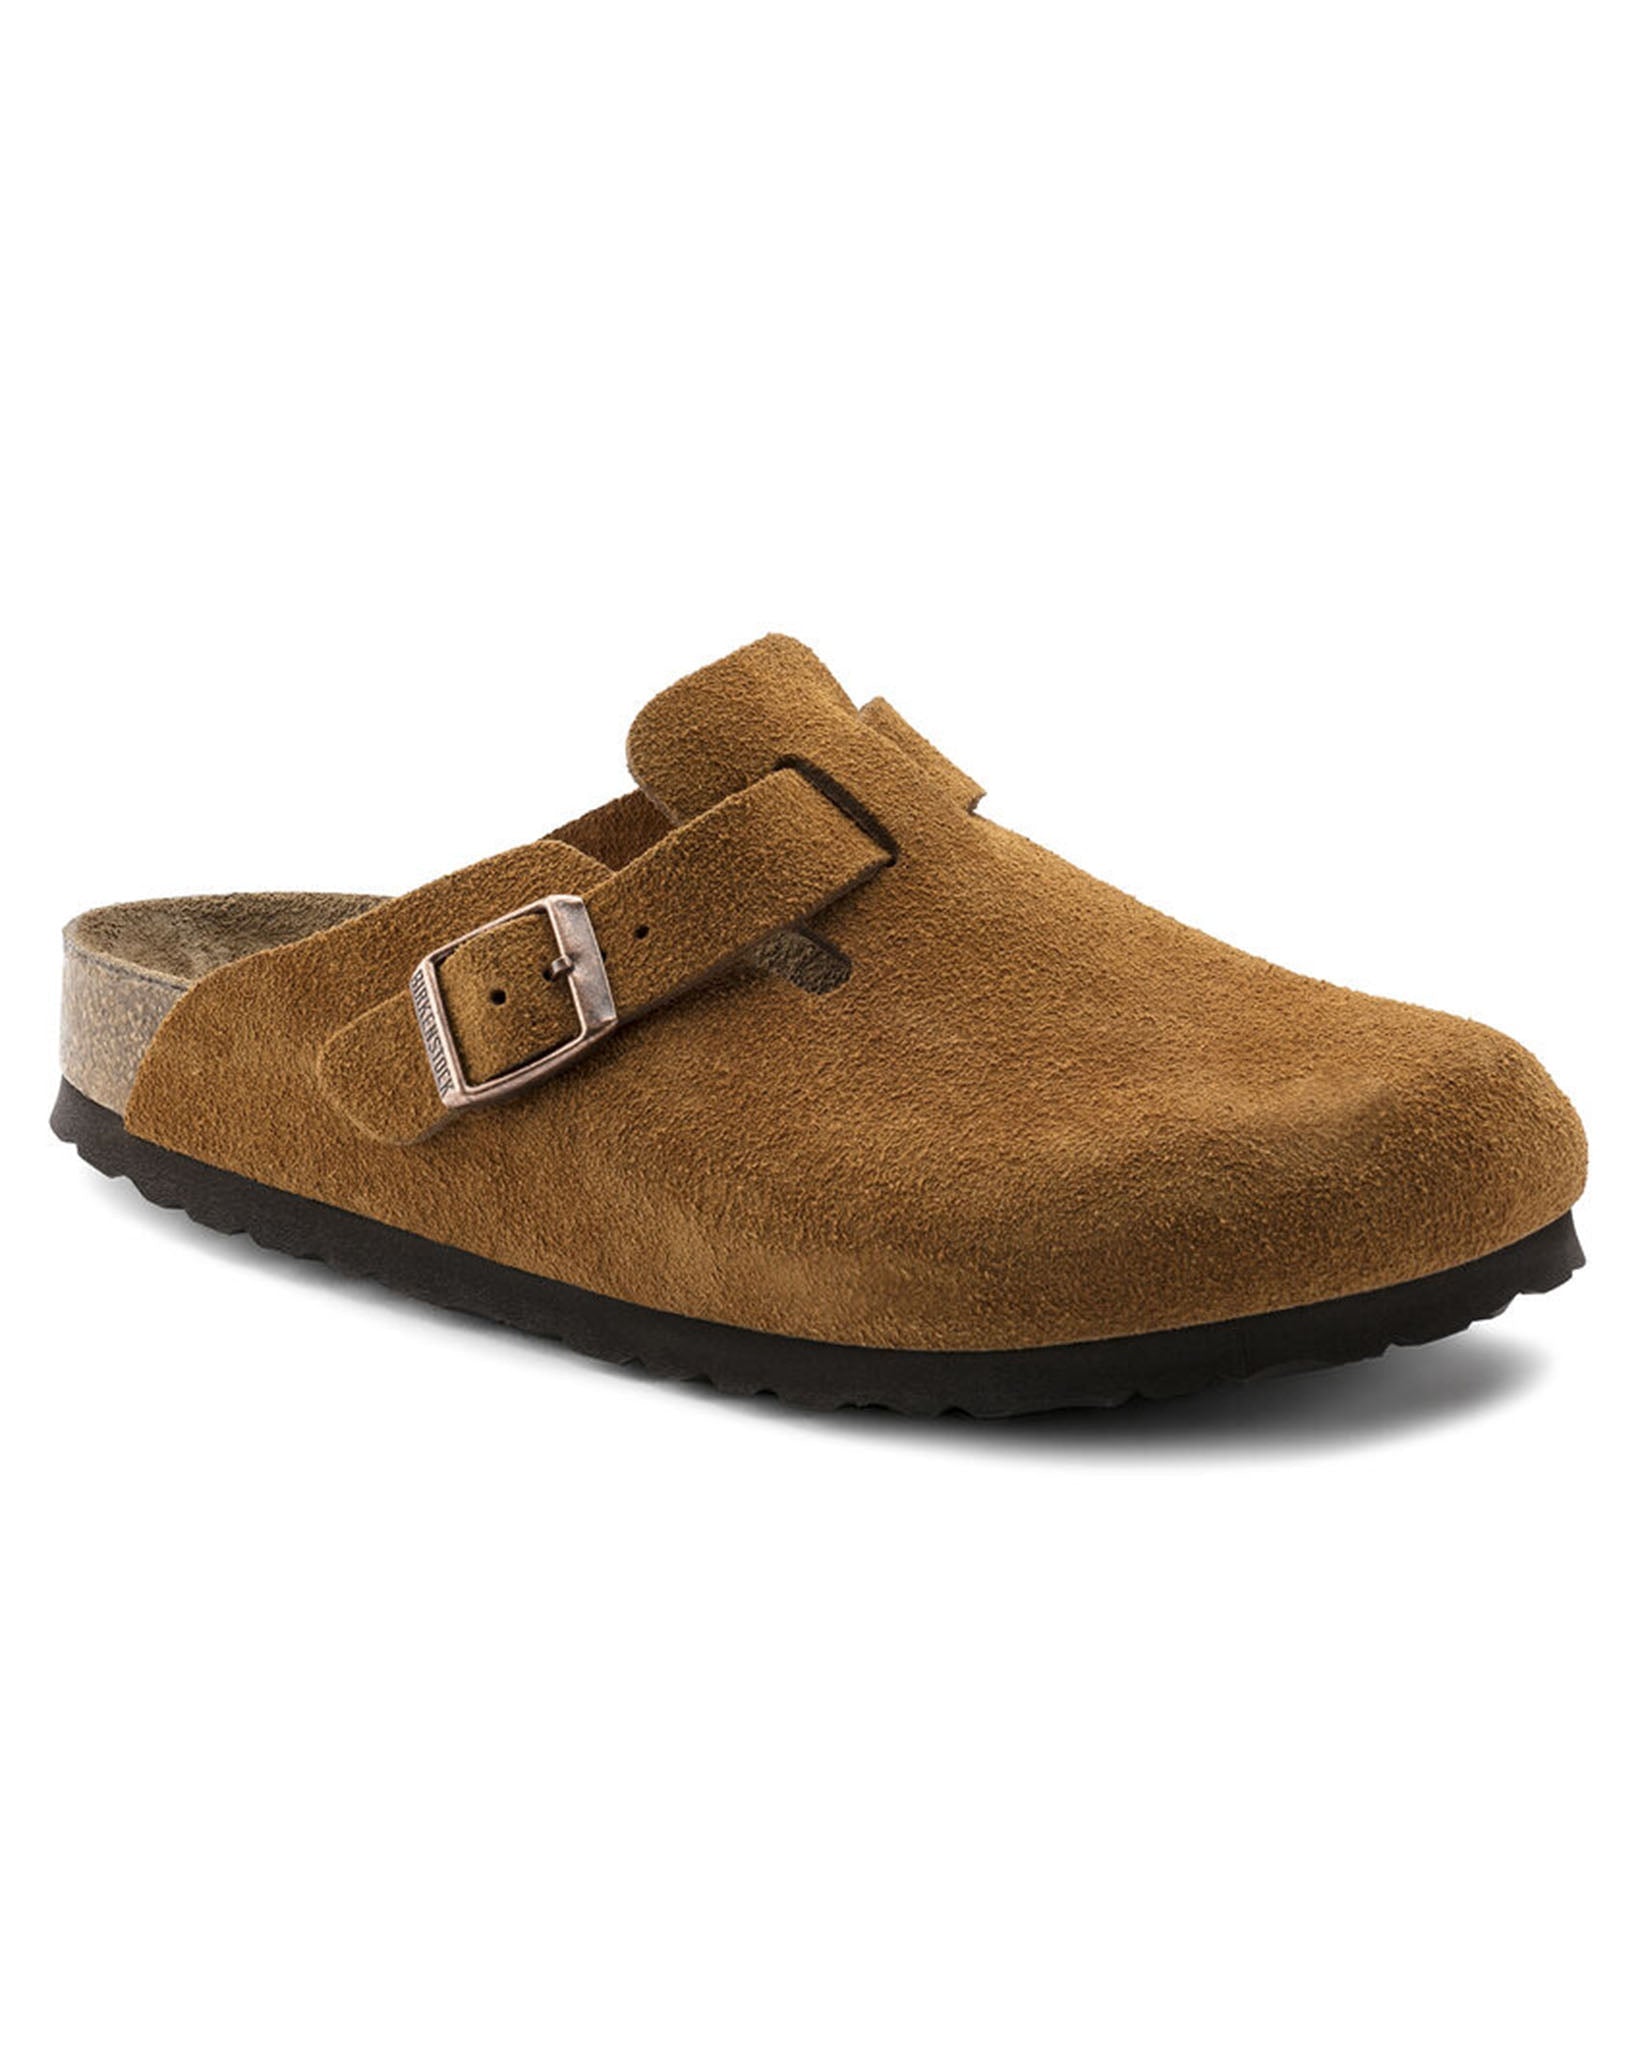 Boston Soft Footbed Mink Suede Leather Clogs